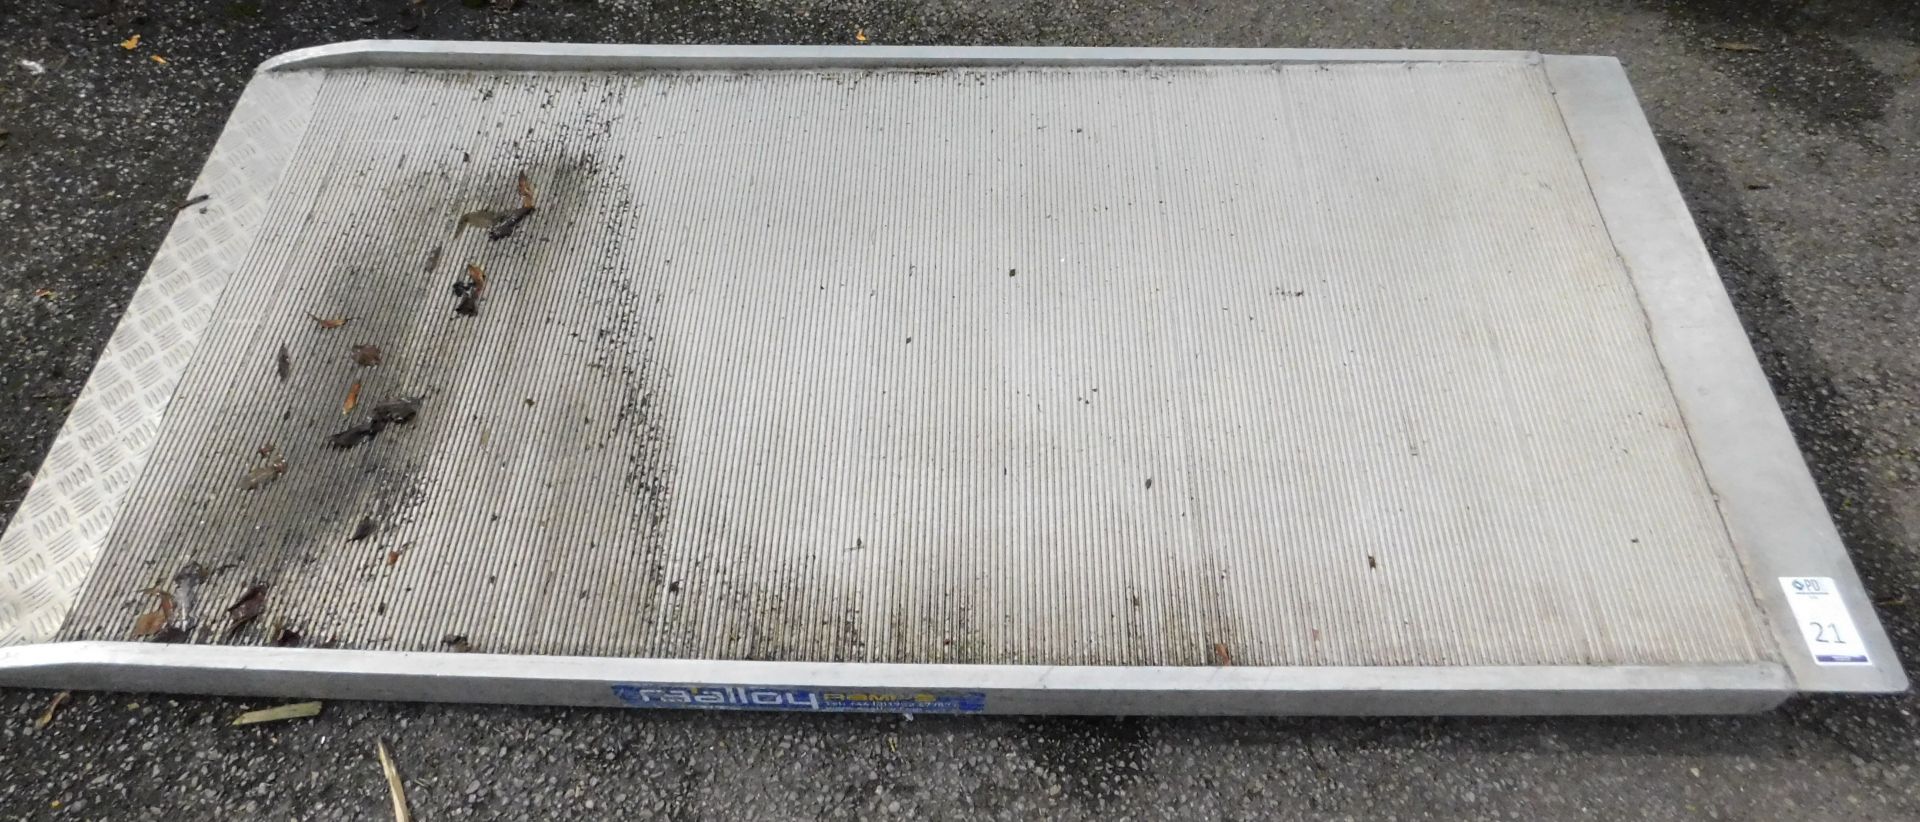 Raaloy Aluminium Container Ramp (Location: Thame. Please Refer to General Notes)